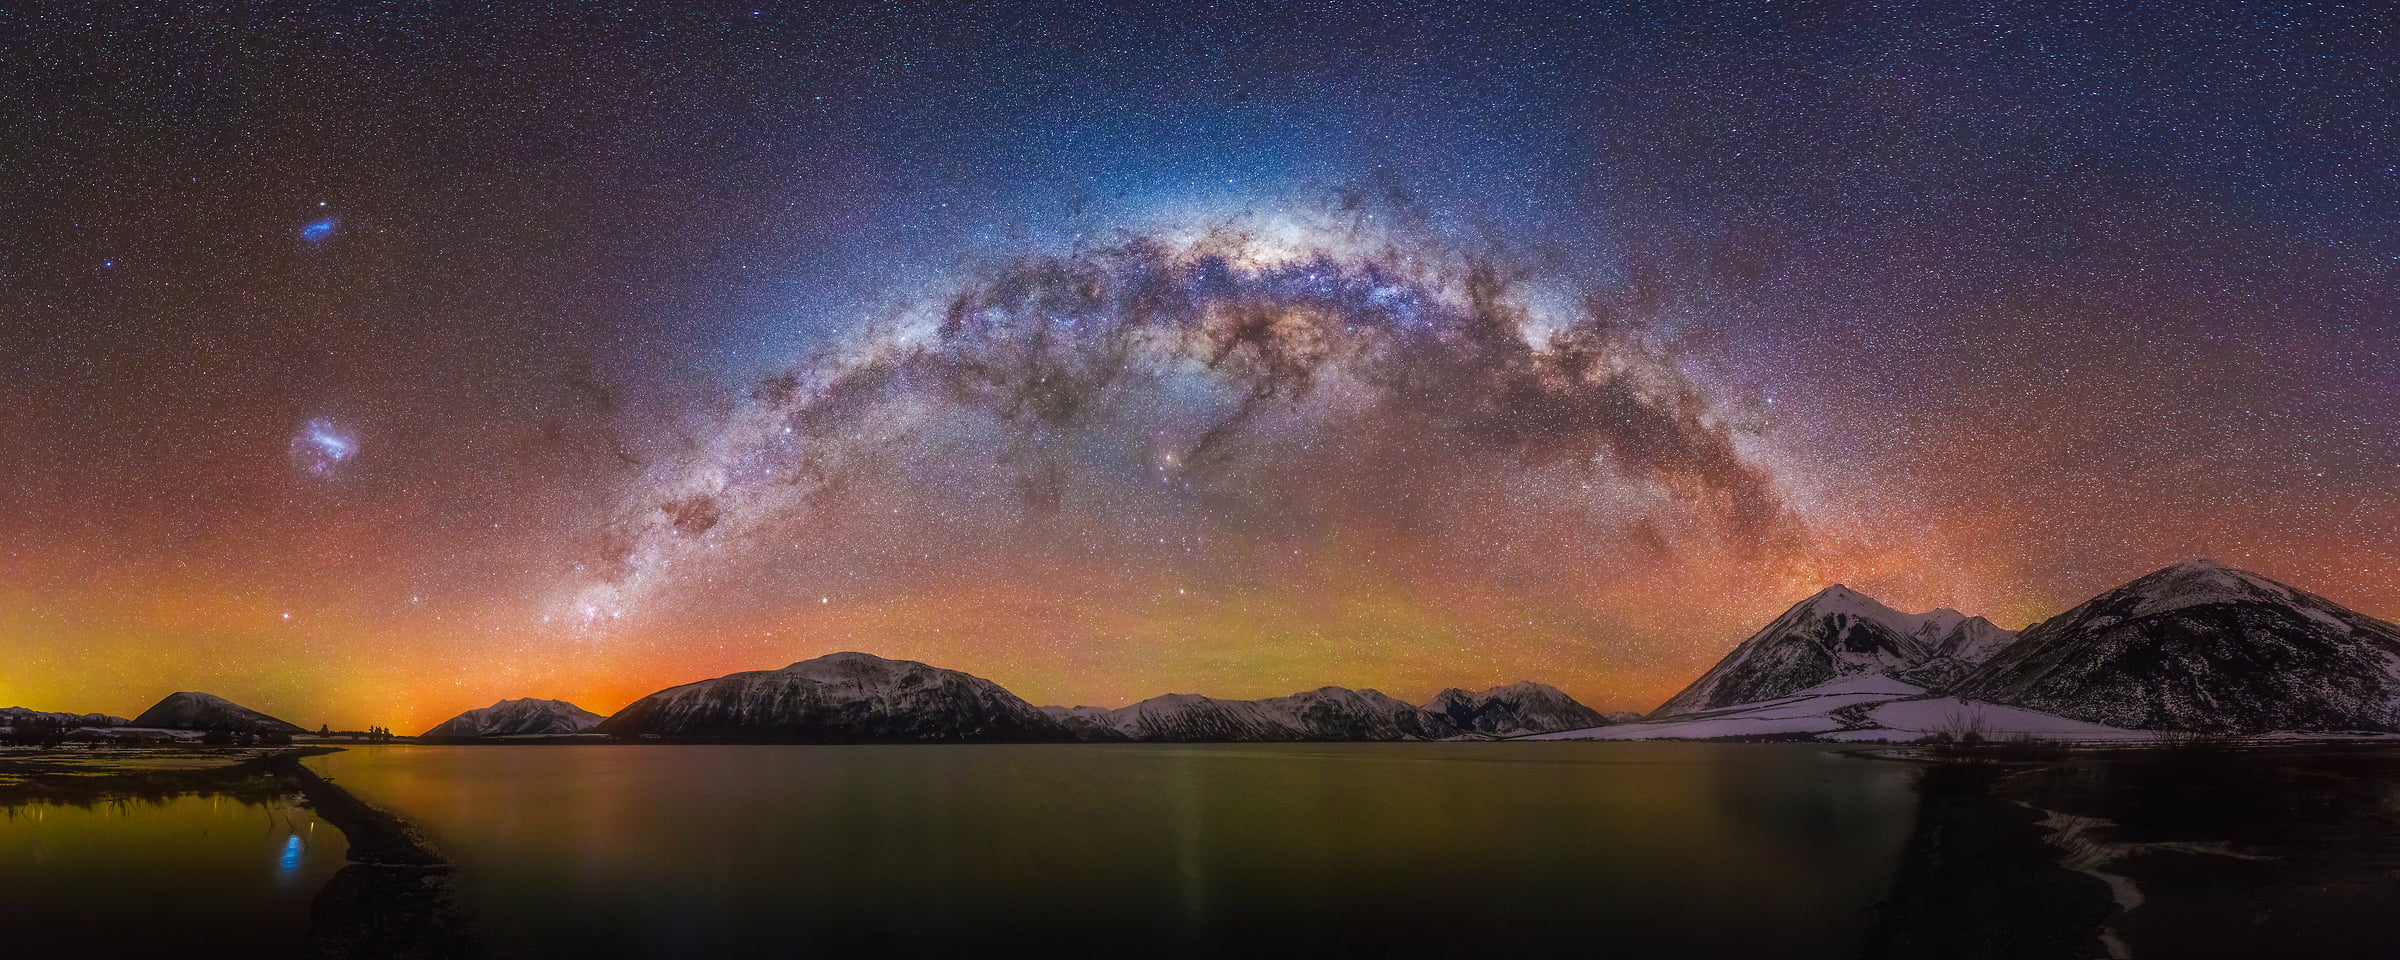 161 megapixels! A very high resolution, large-format VAST photo print of the night sky, milky way, and stars over mountains and a lake; fine art astrophotography landscape photo created by Paul Wilson in Lake Coleridge, New Zealand.